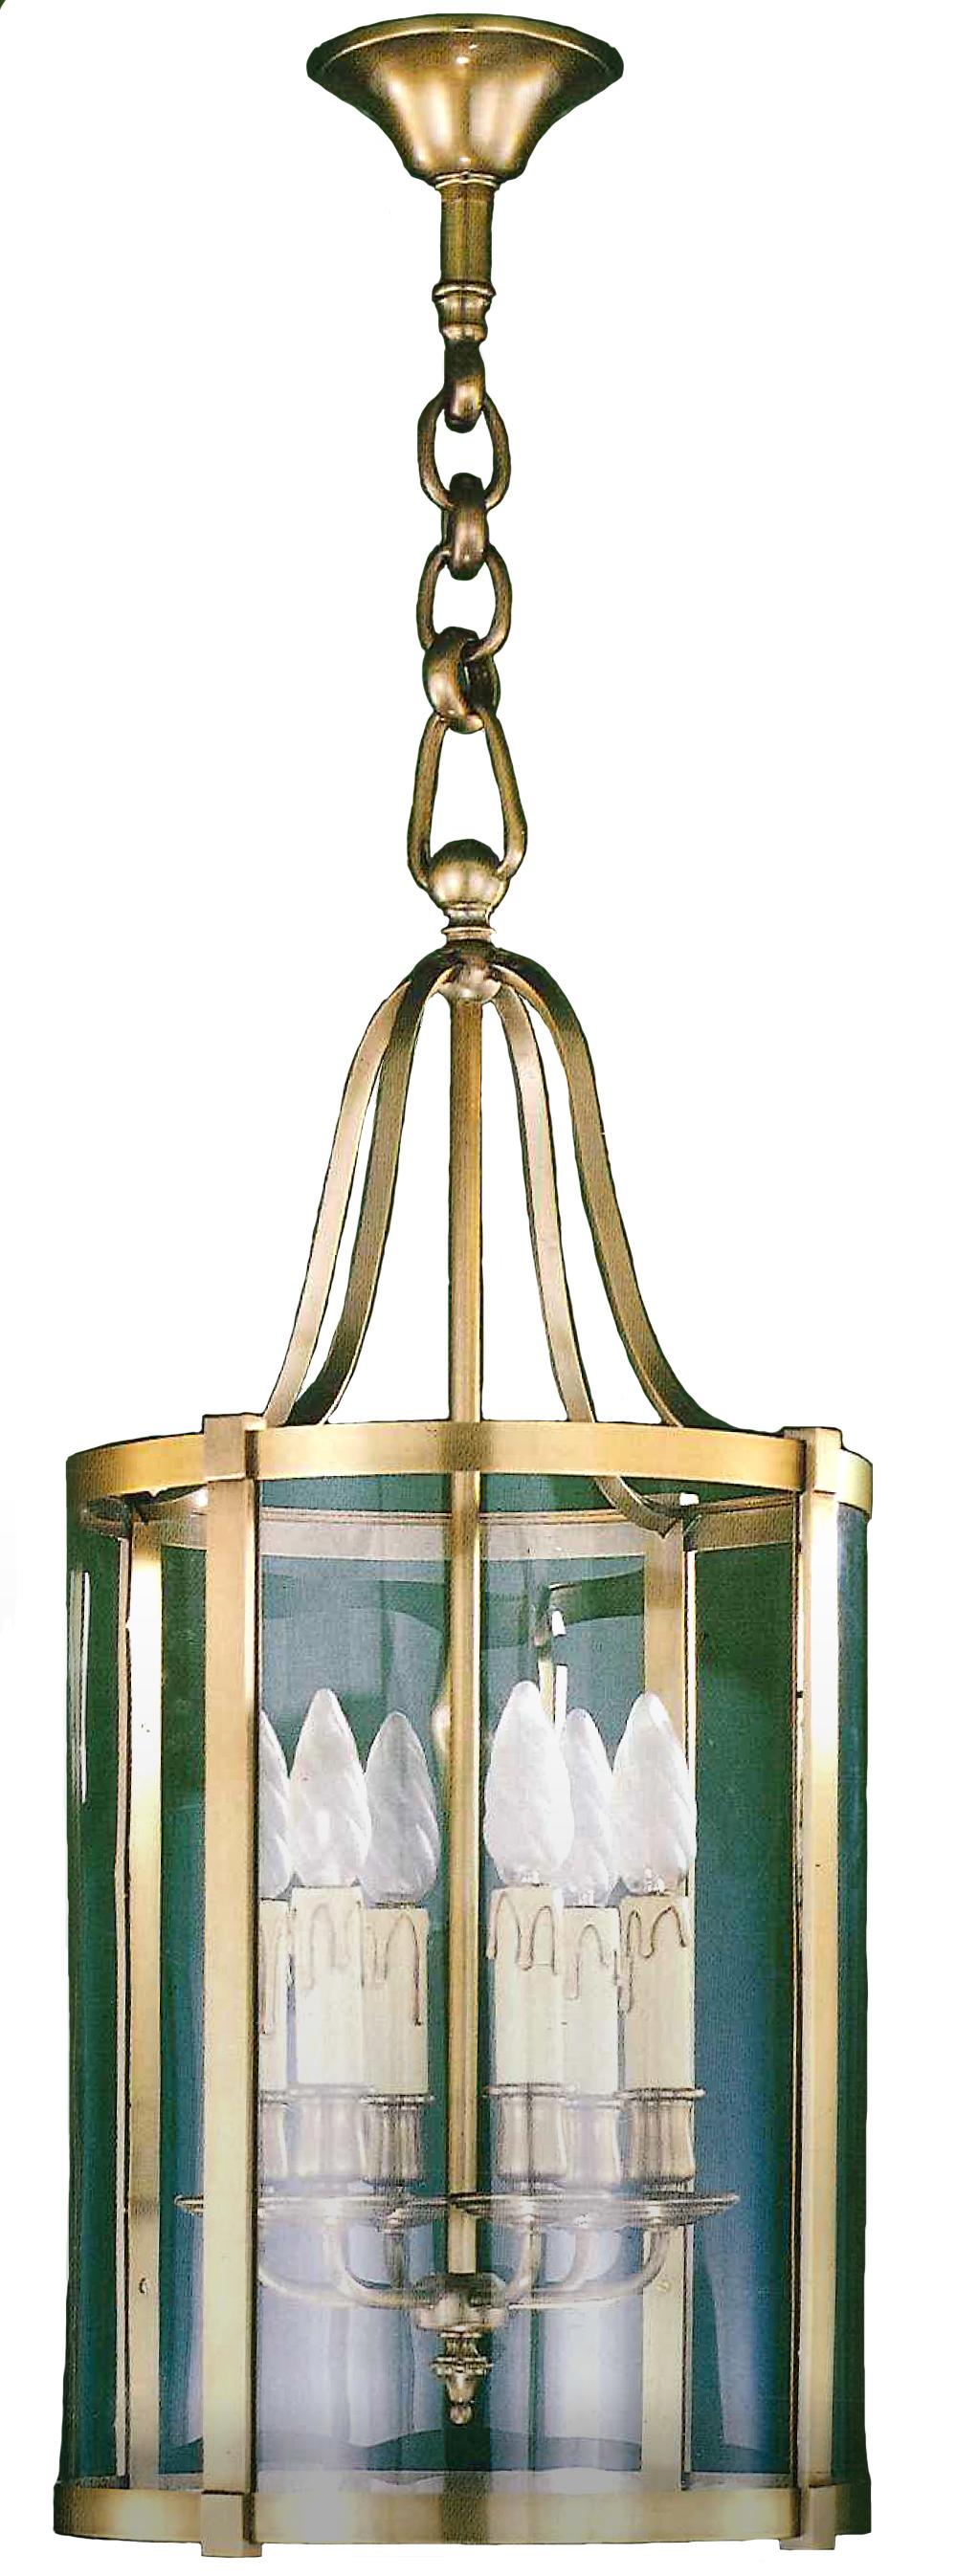 This bronze lantern with six lights is simple and elegant, its raw design matches well with all interiors.